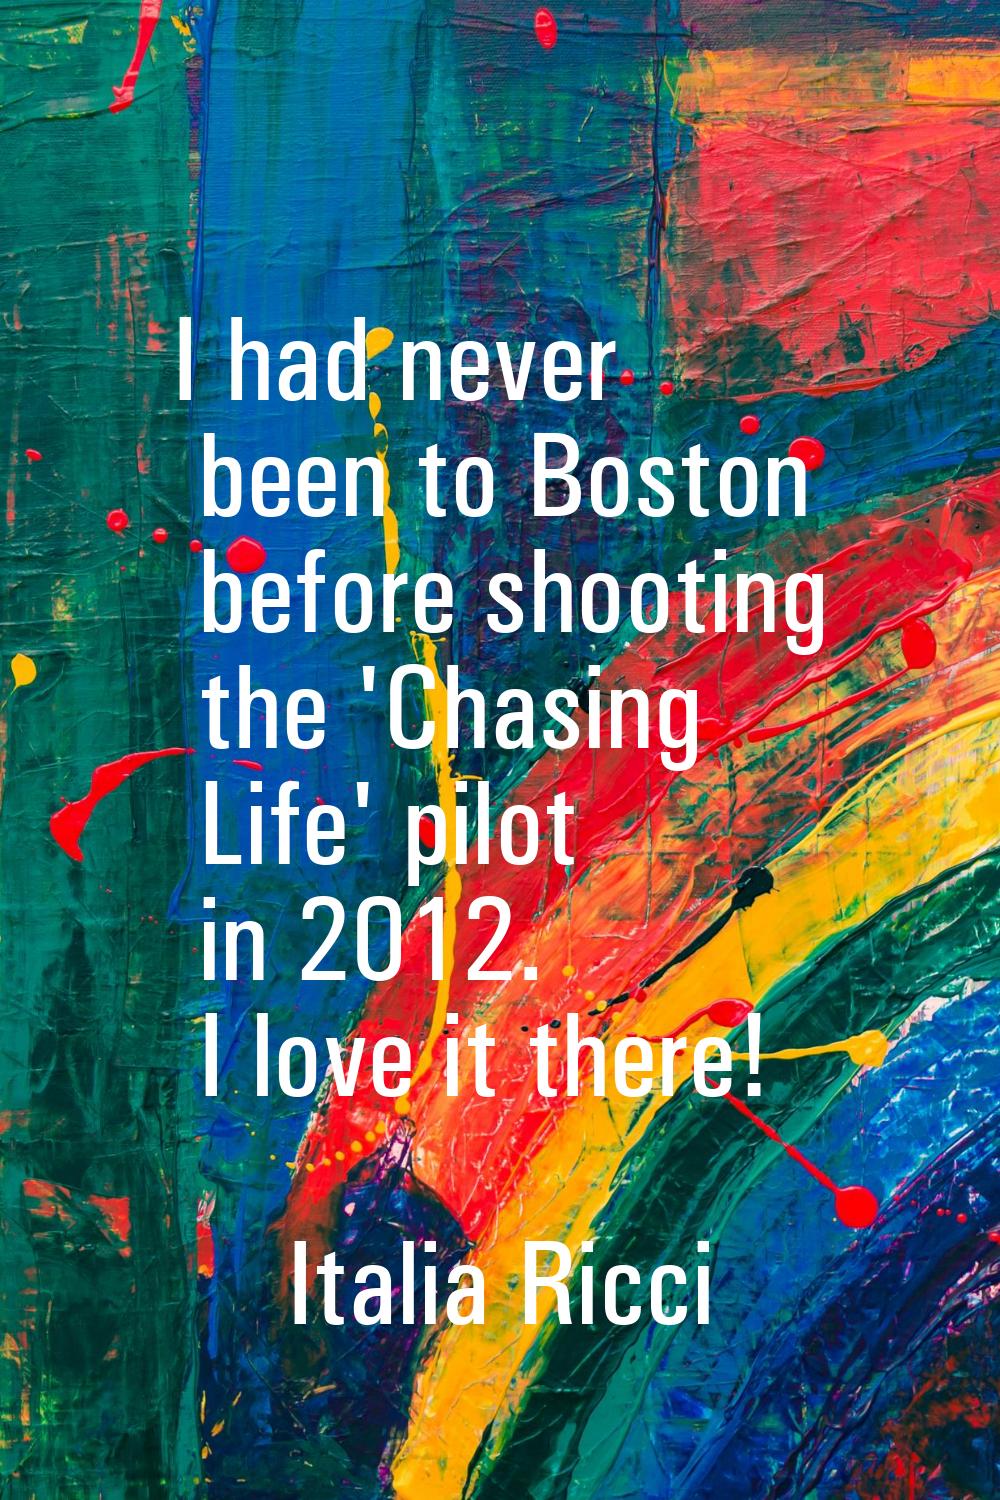 I had never been to Boston before shooting the 'Chasing Life' pilot in 2012. I love it there!